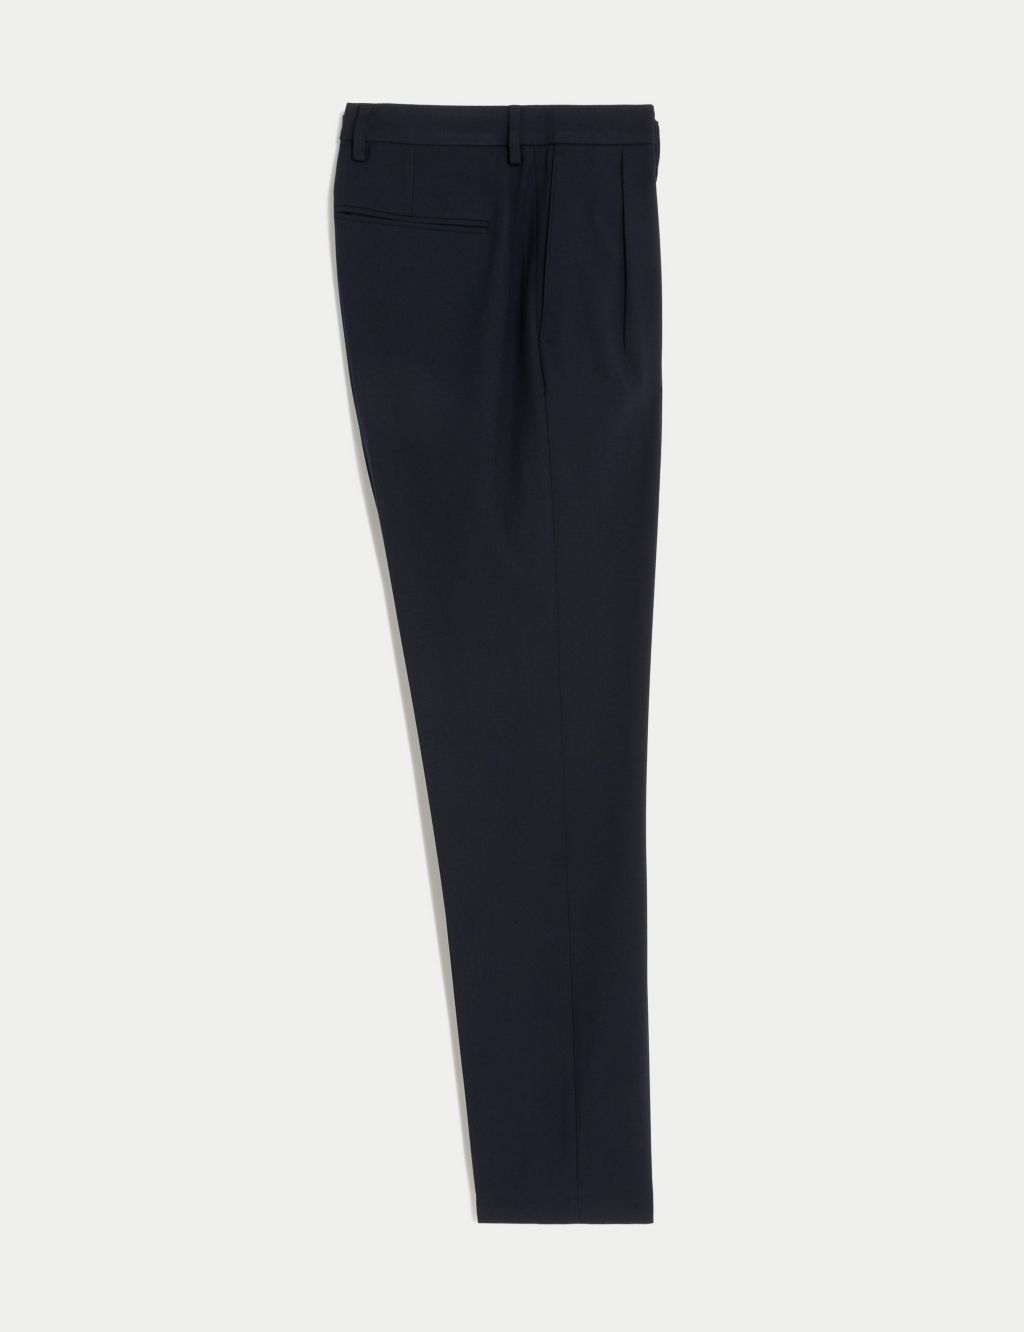 Twin Pleat Stretch Trousers image 2